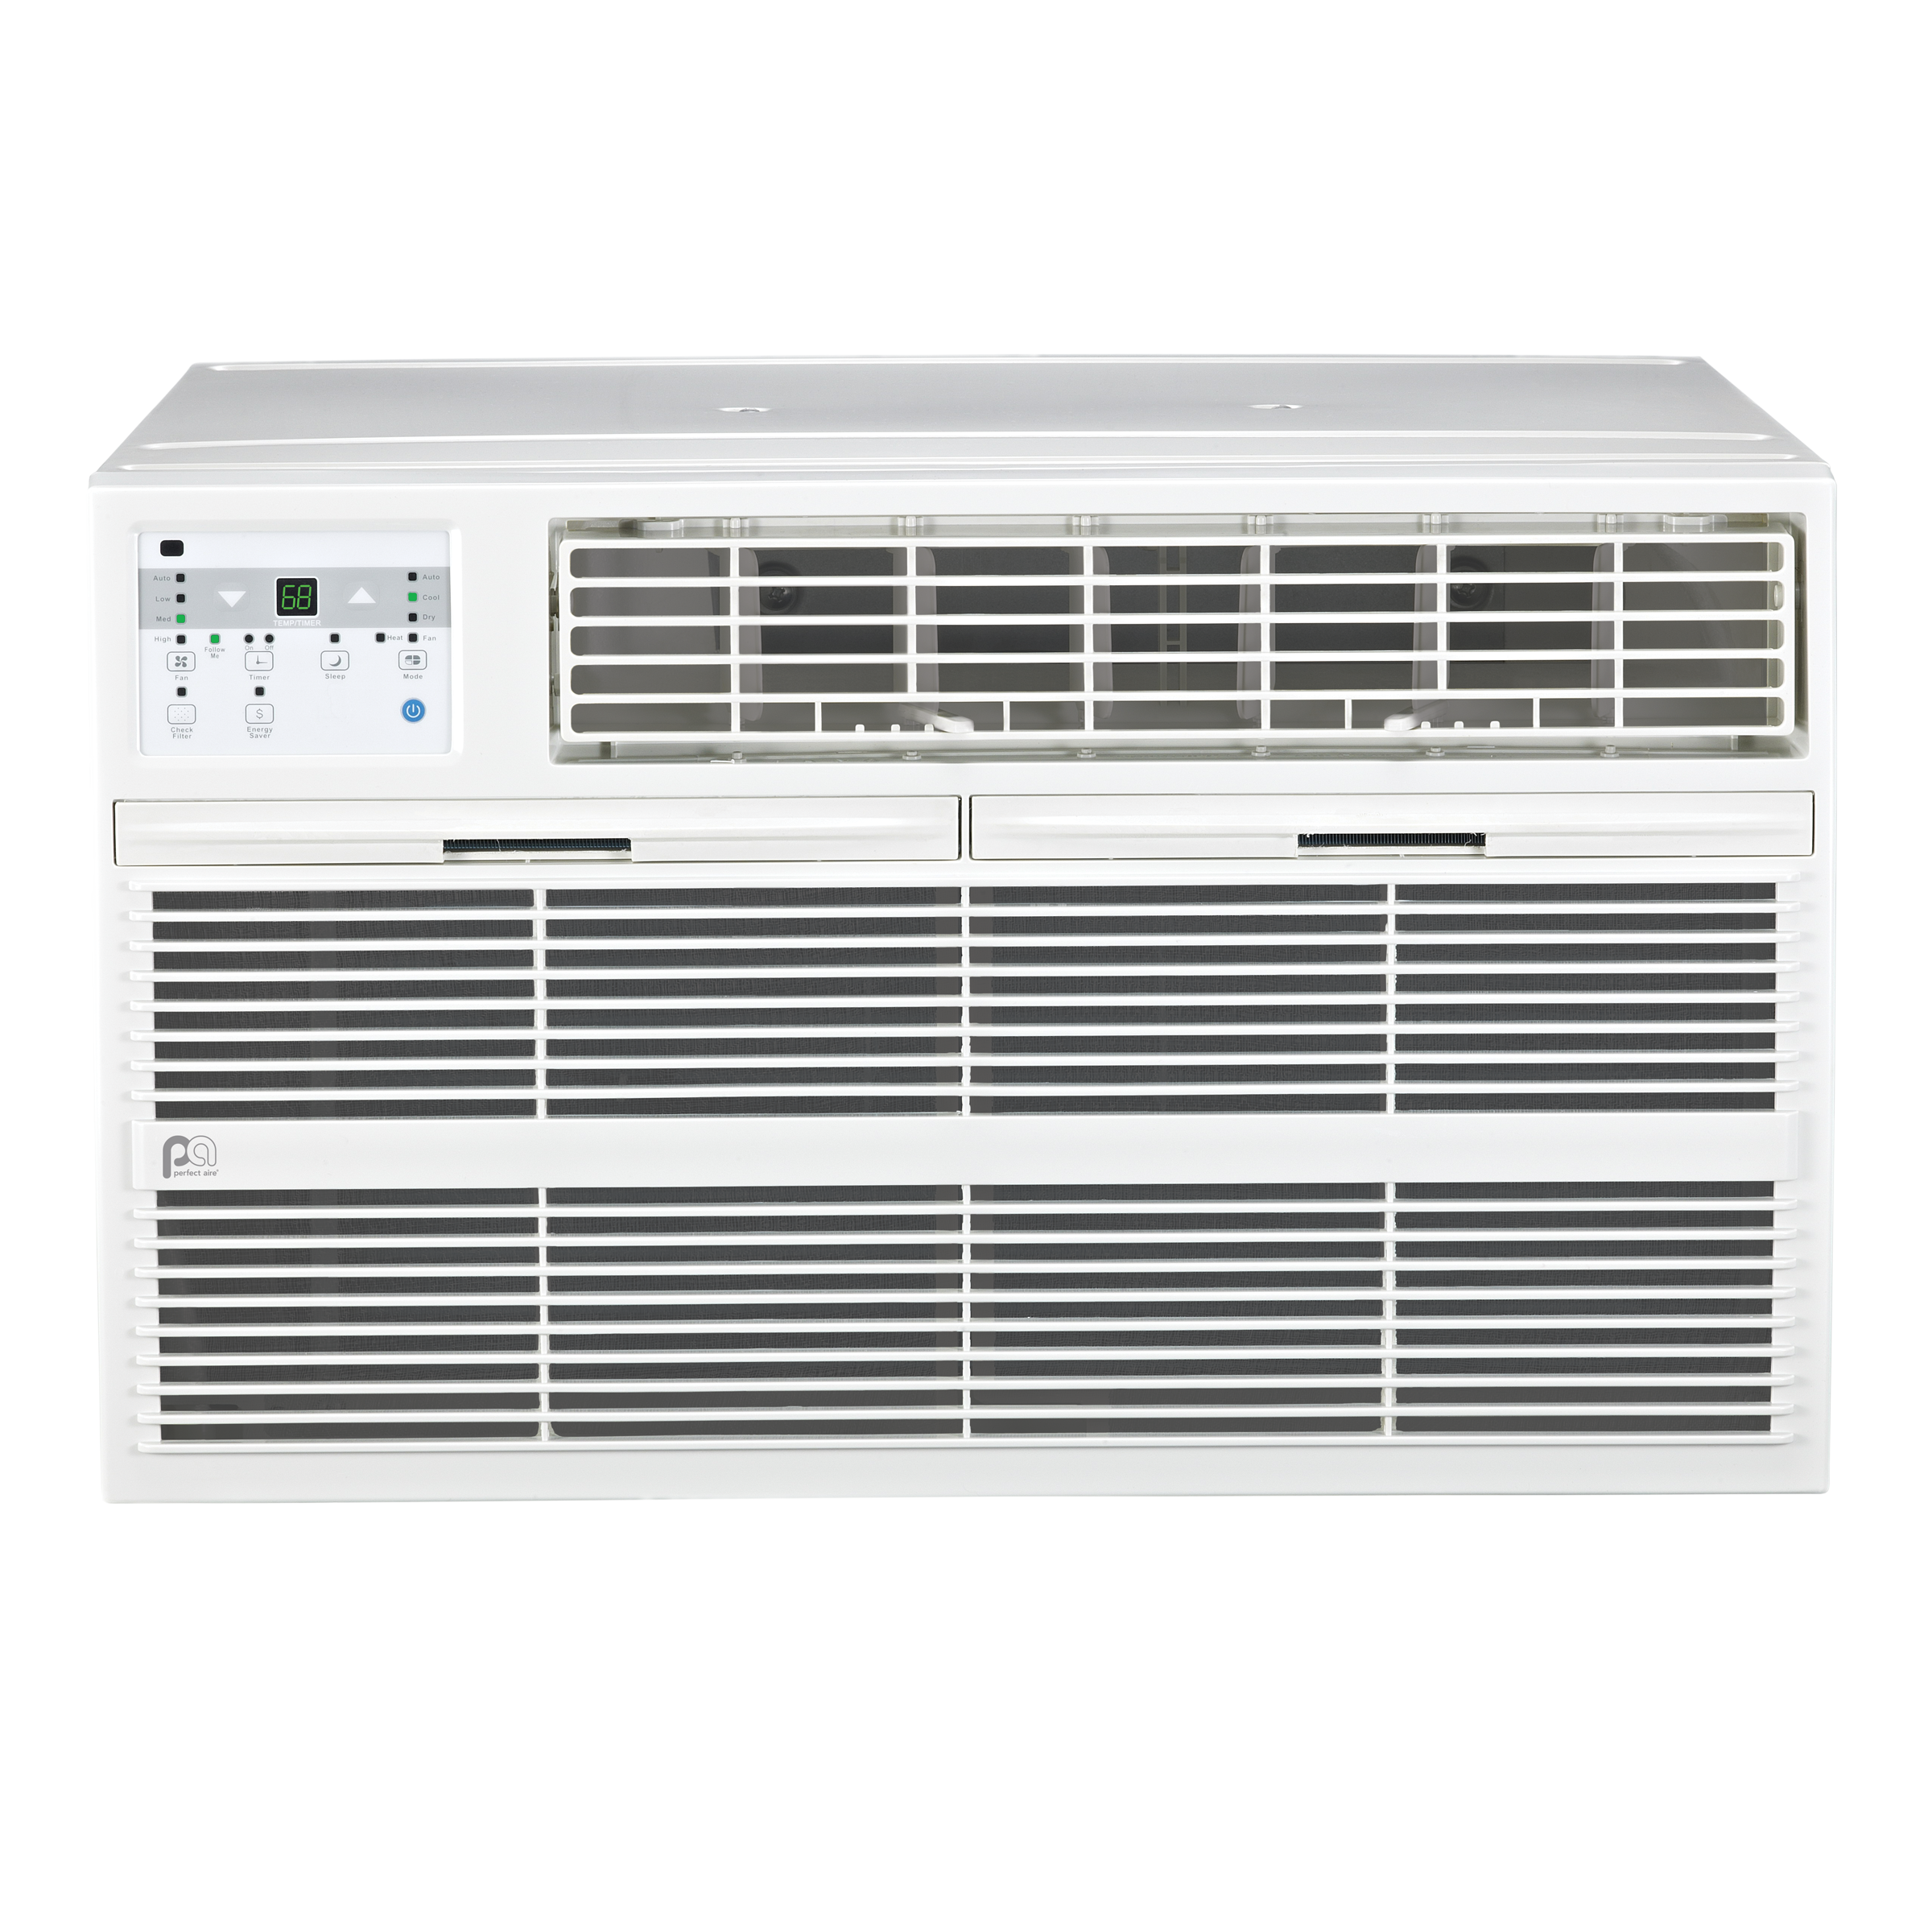 4PATW12000 Perfect Aire 12,000 BTU Thru-the-Wall Air Conditioner, Sq. ft: 450-550 Coverage, With Remote Control